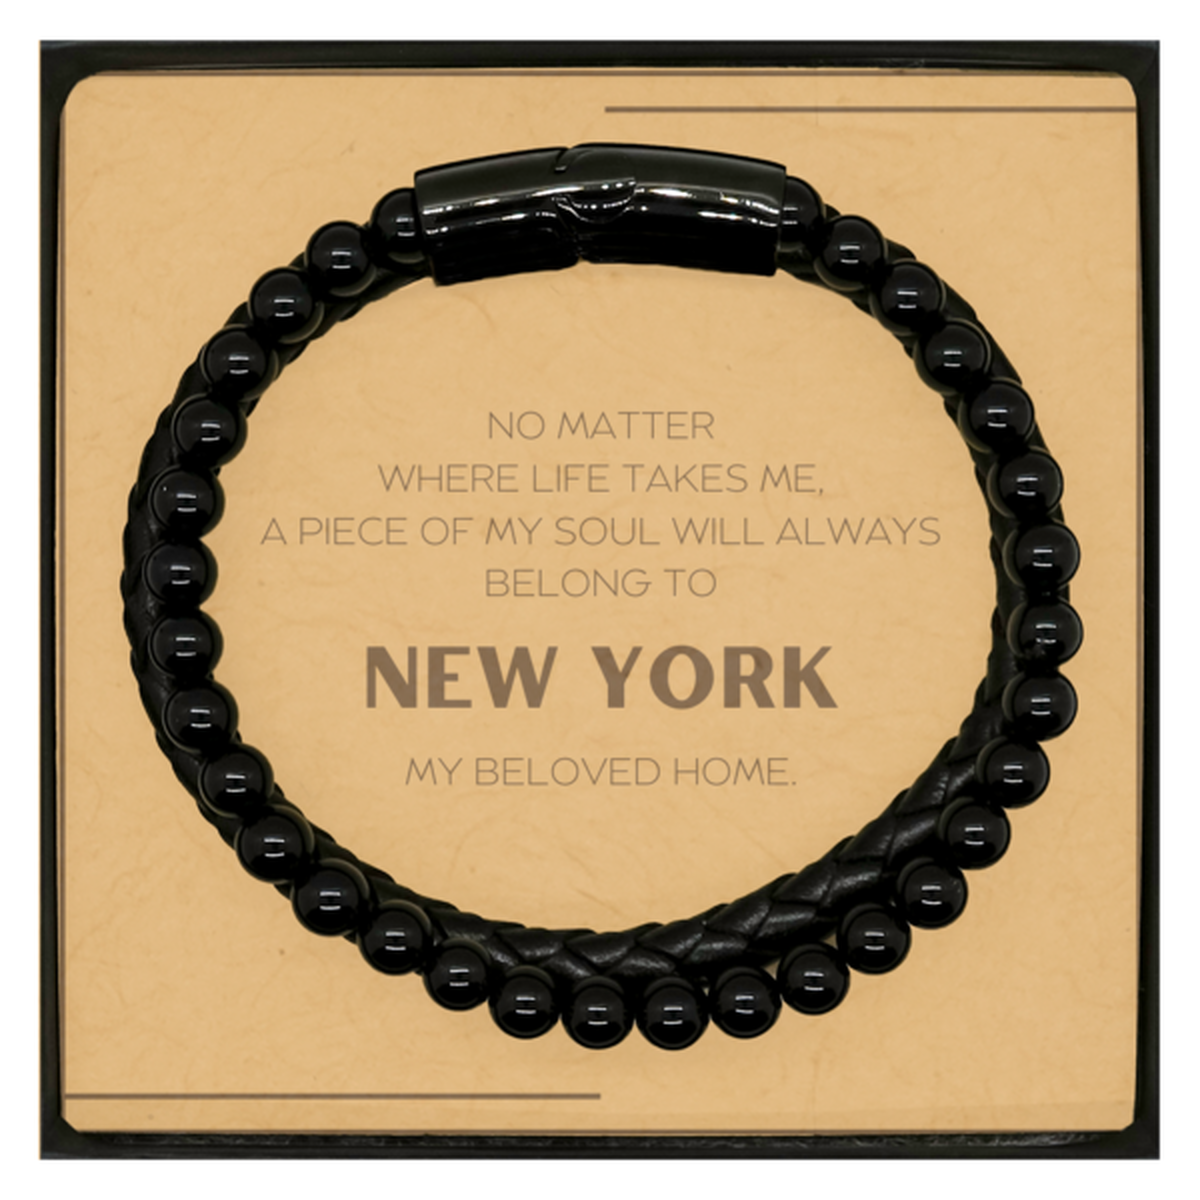 Love New York State Gifts, My soul will always belong to New York, Proud Stone Leather Bracelets, Birthday Christmas Unique Gifts For New York Men, Women, Friends